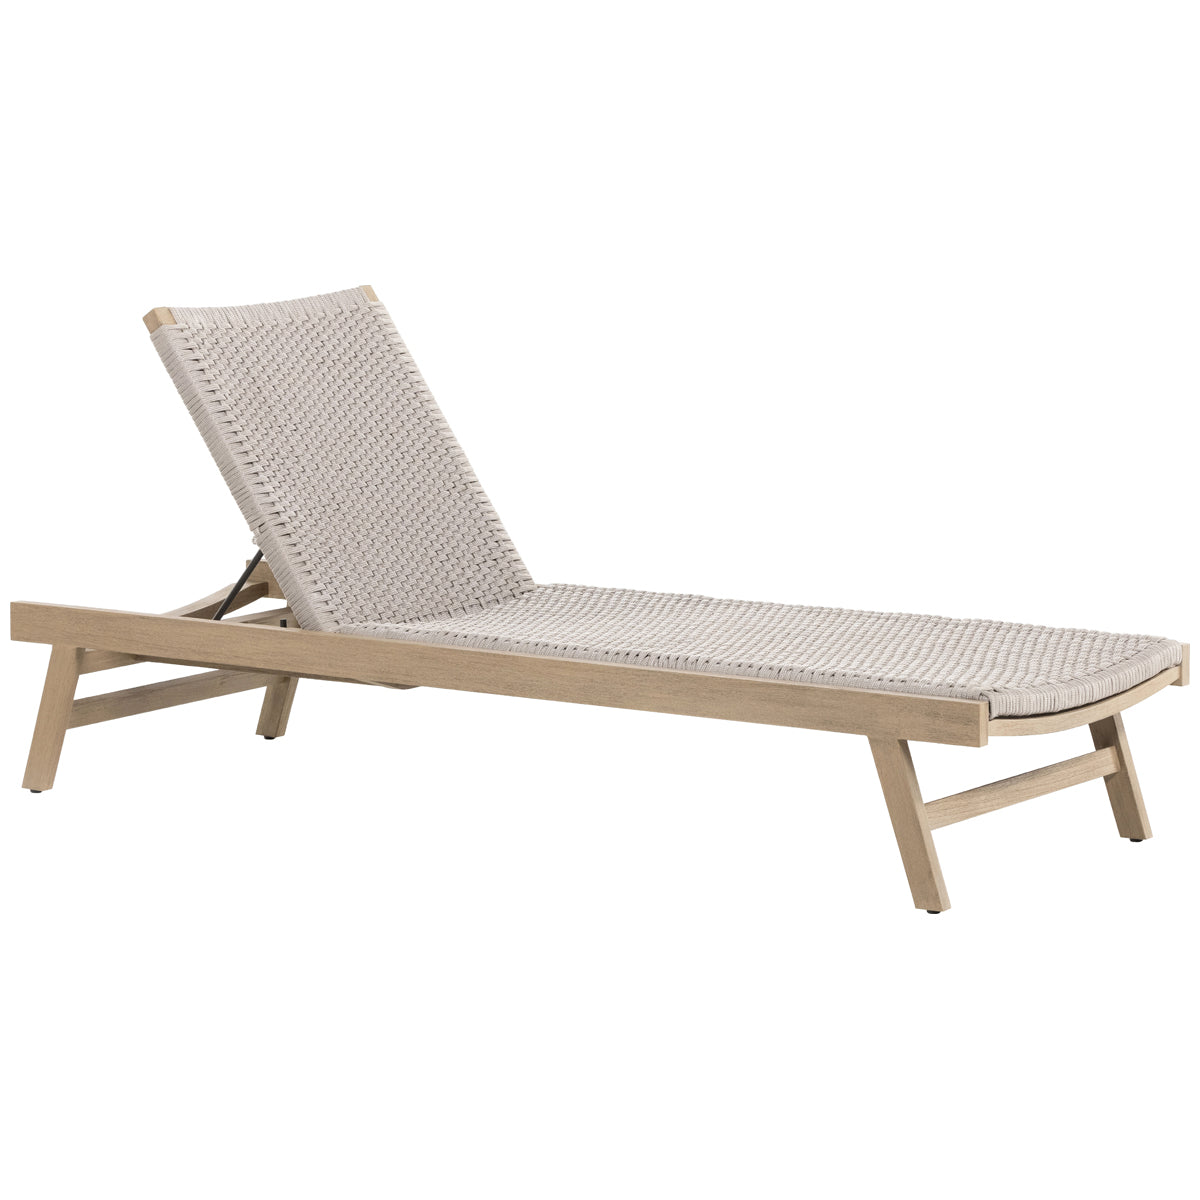 Four Hands Solano Delano Outdoor Chaise